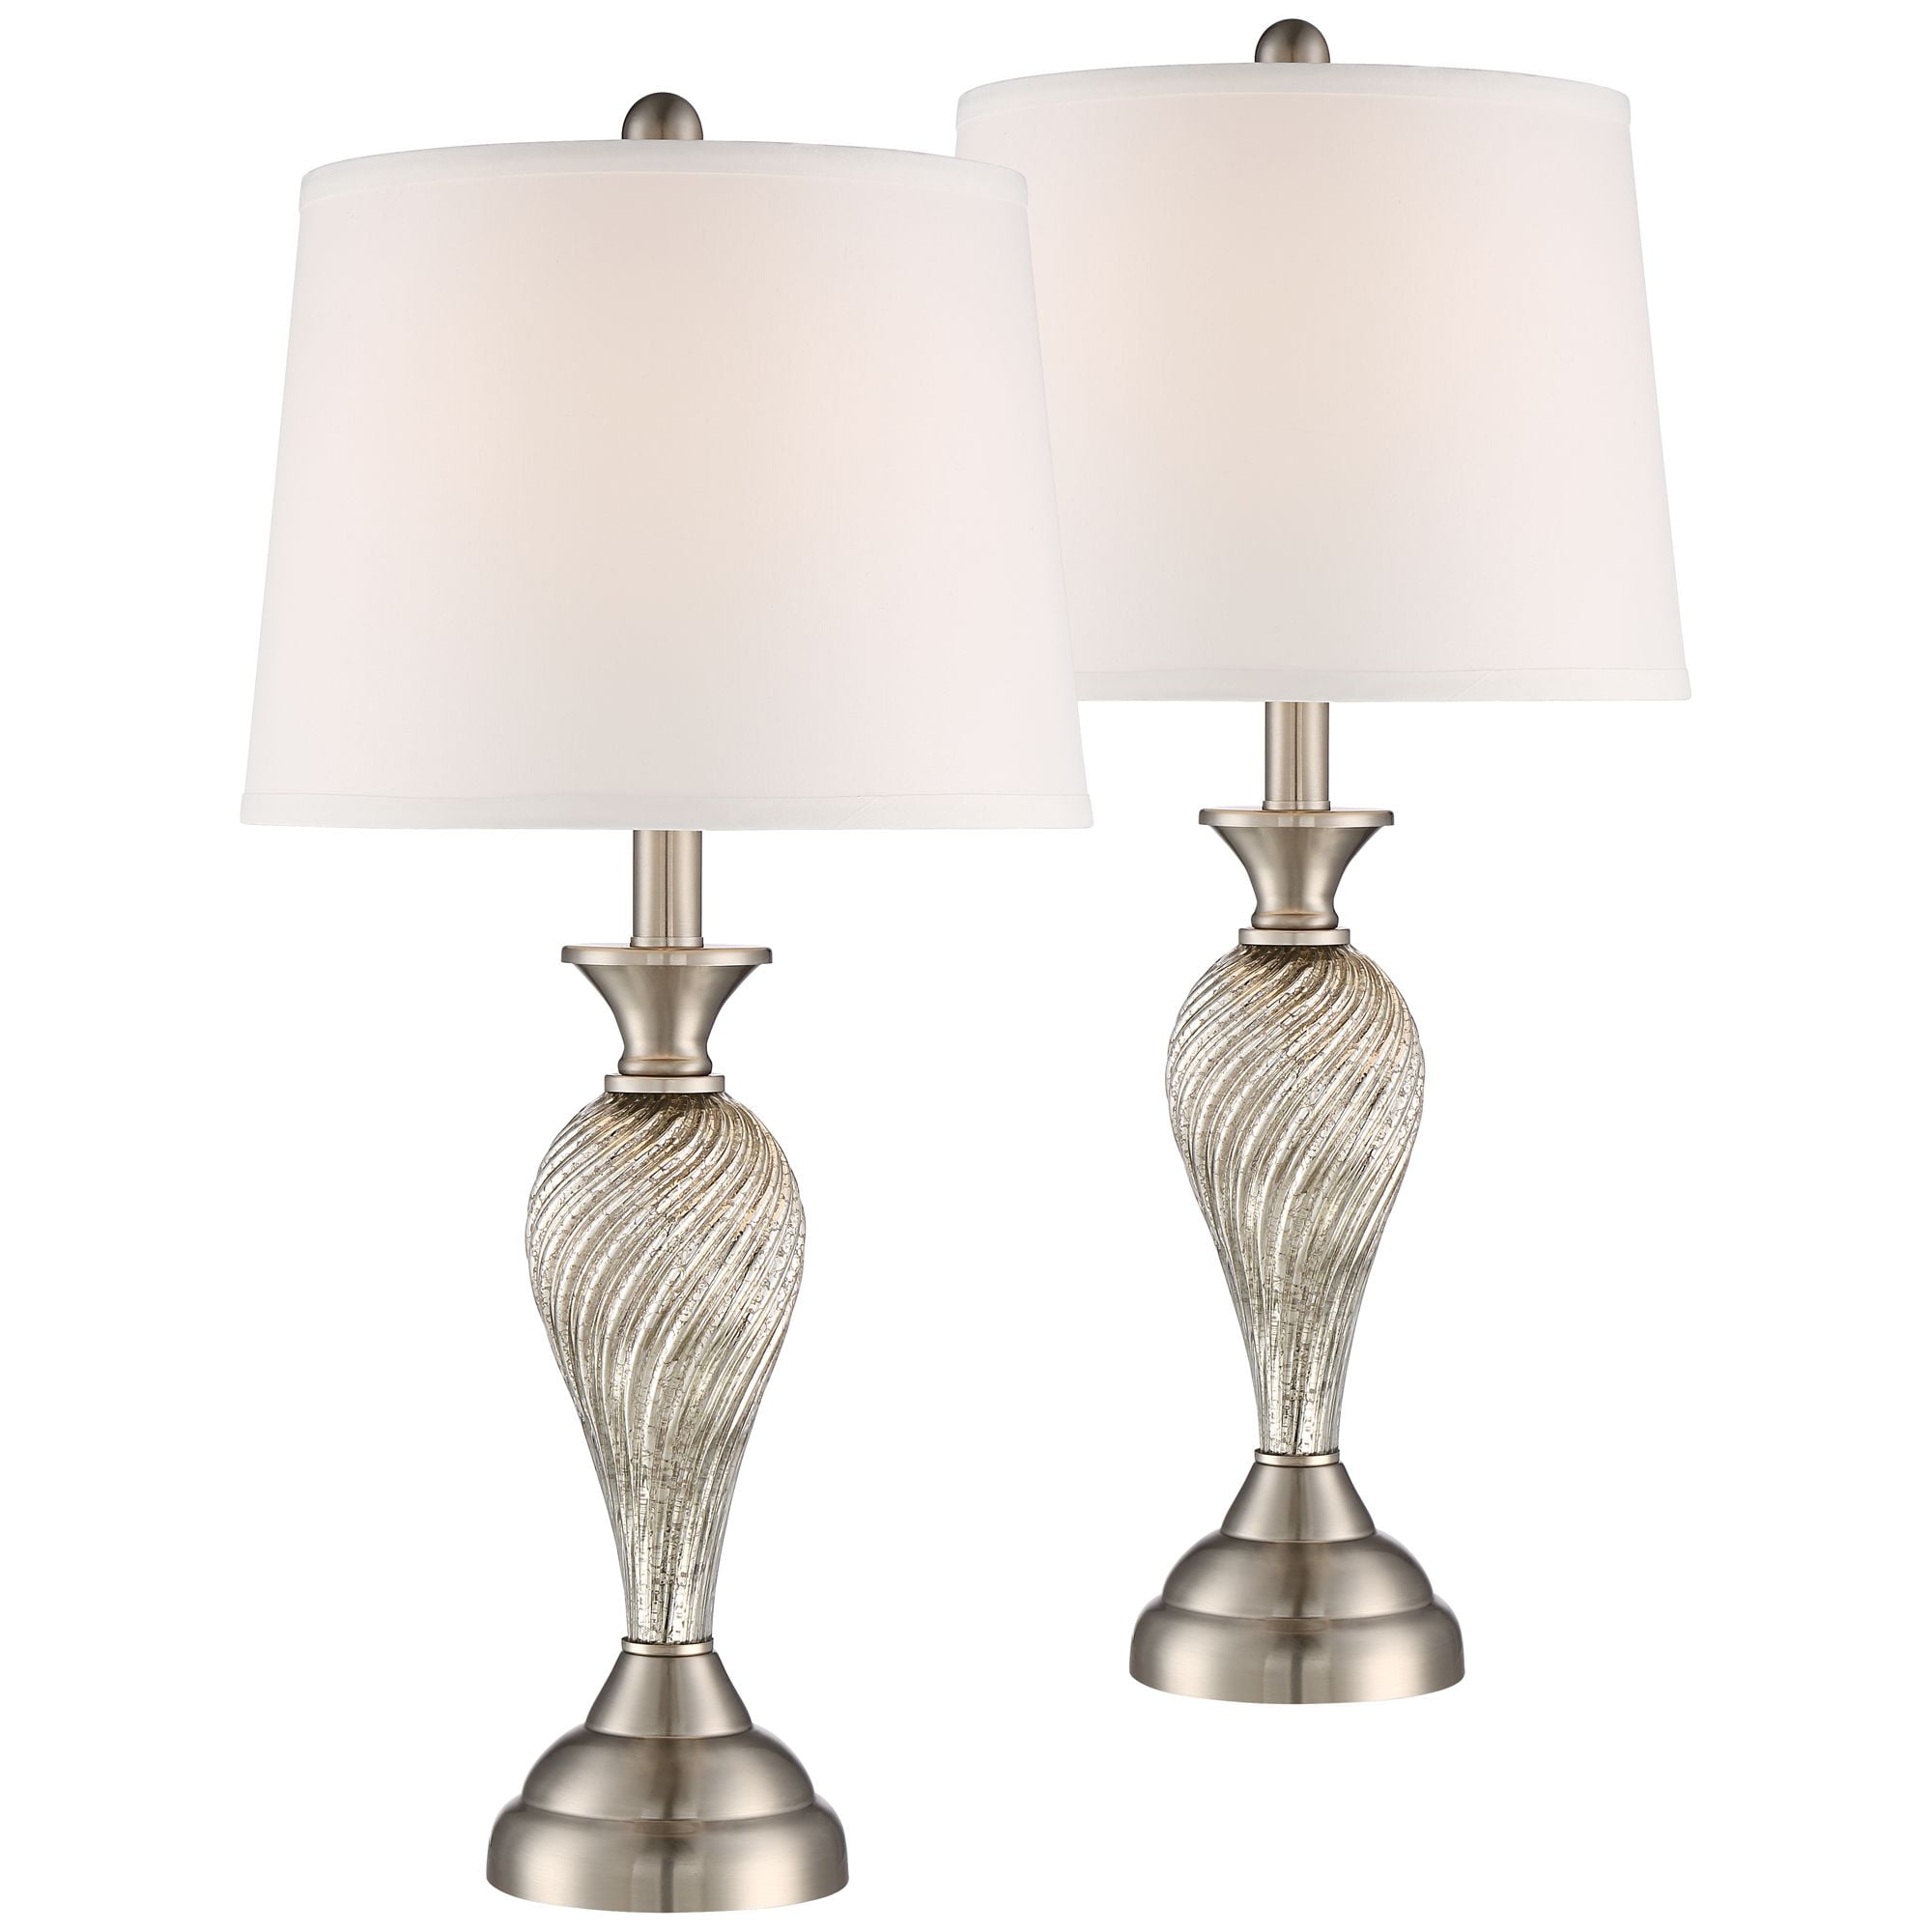 Regency Hill Traditional Table Lamps Set of 2 Mercury Glass Twist White  Empire Shade for Living Room, Family, Bedroom, Bedside, Office - Walmart.com